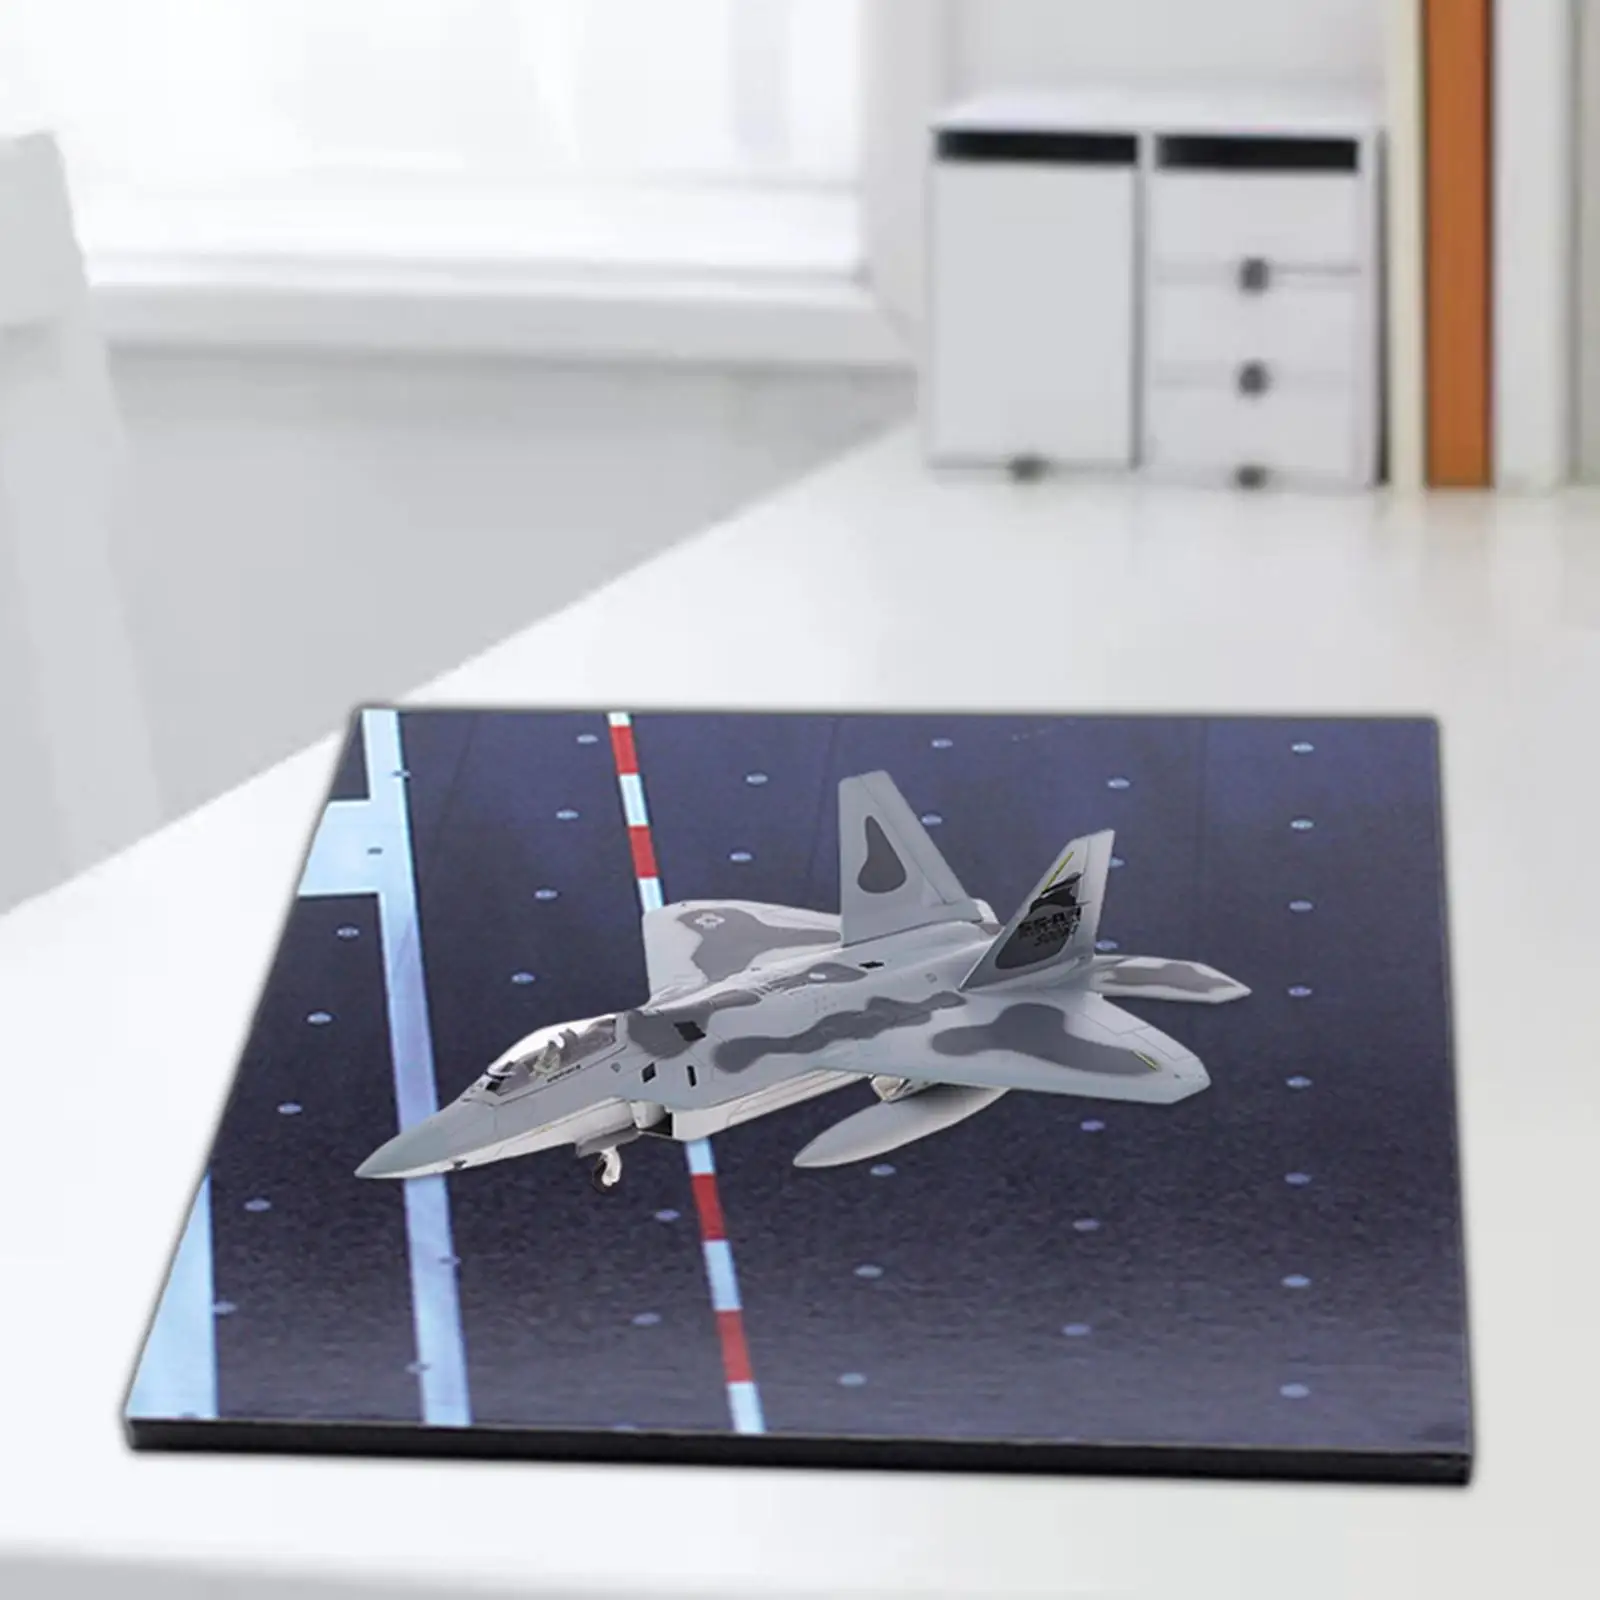 Realistic Airport Runway Platform Display Stand Aircraft Carrier for Decor